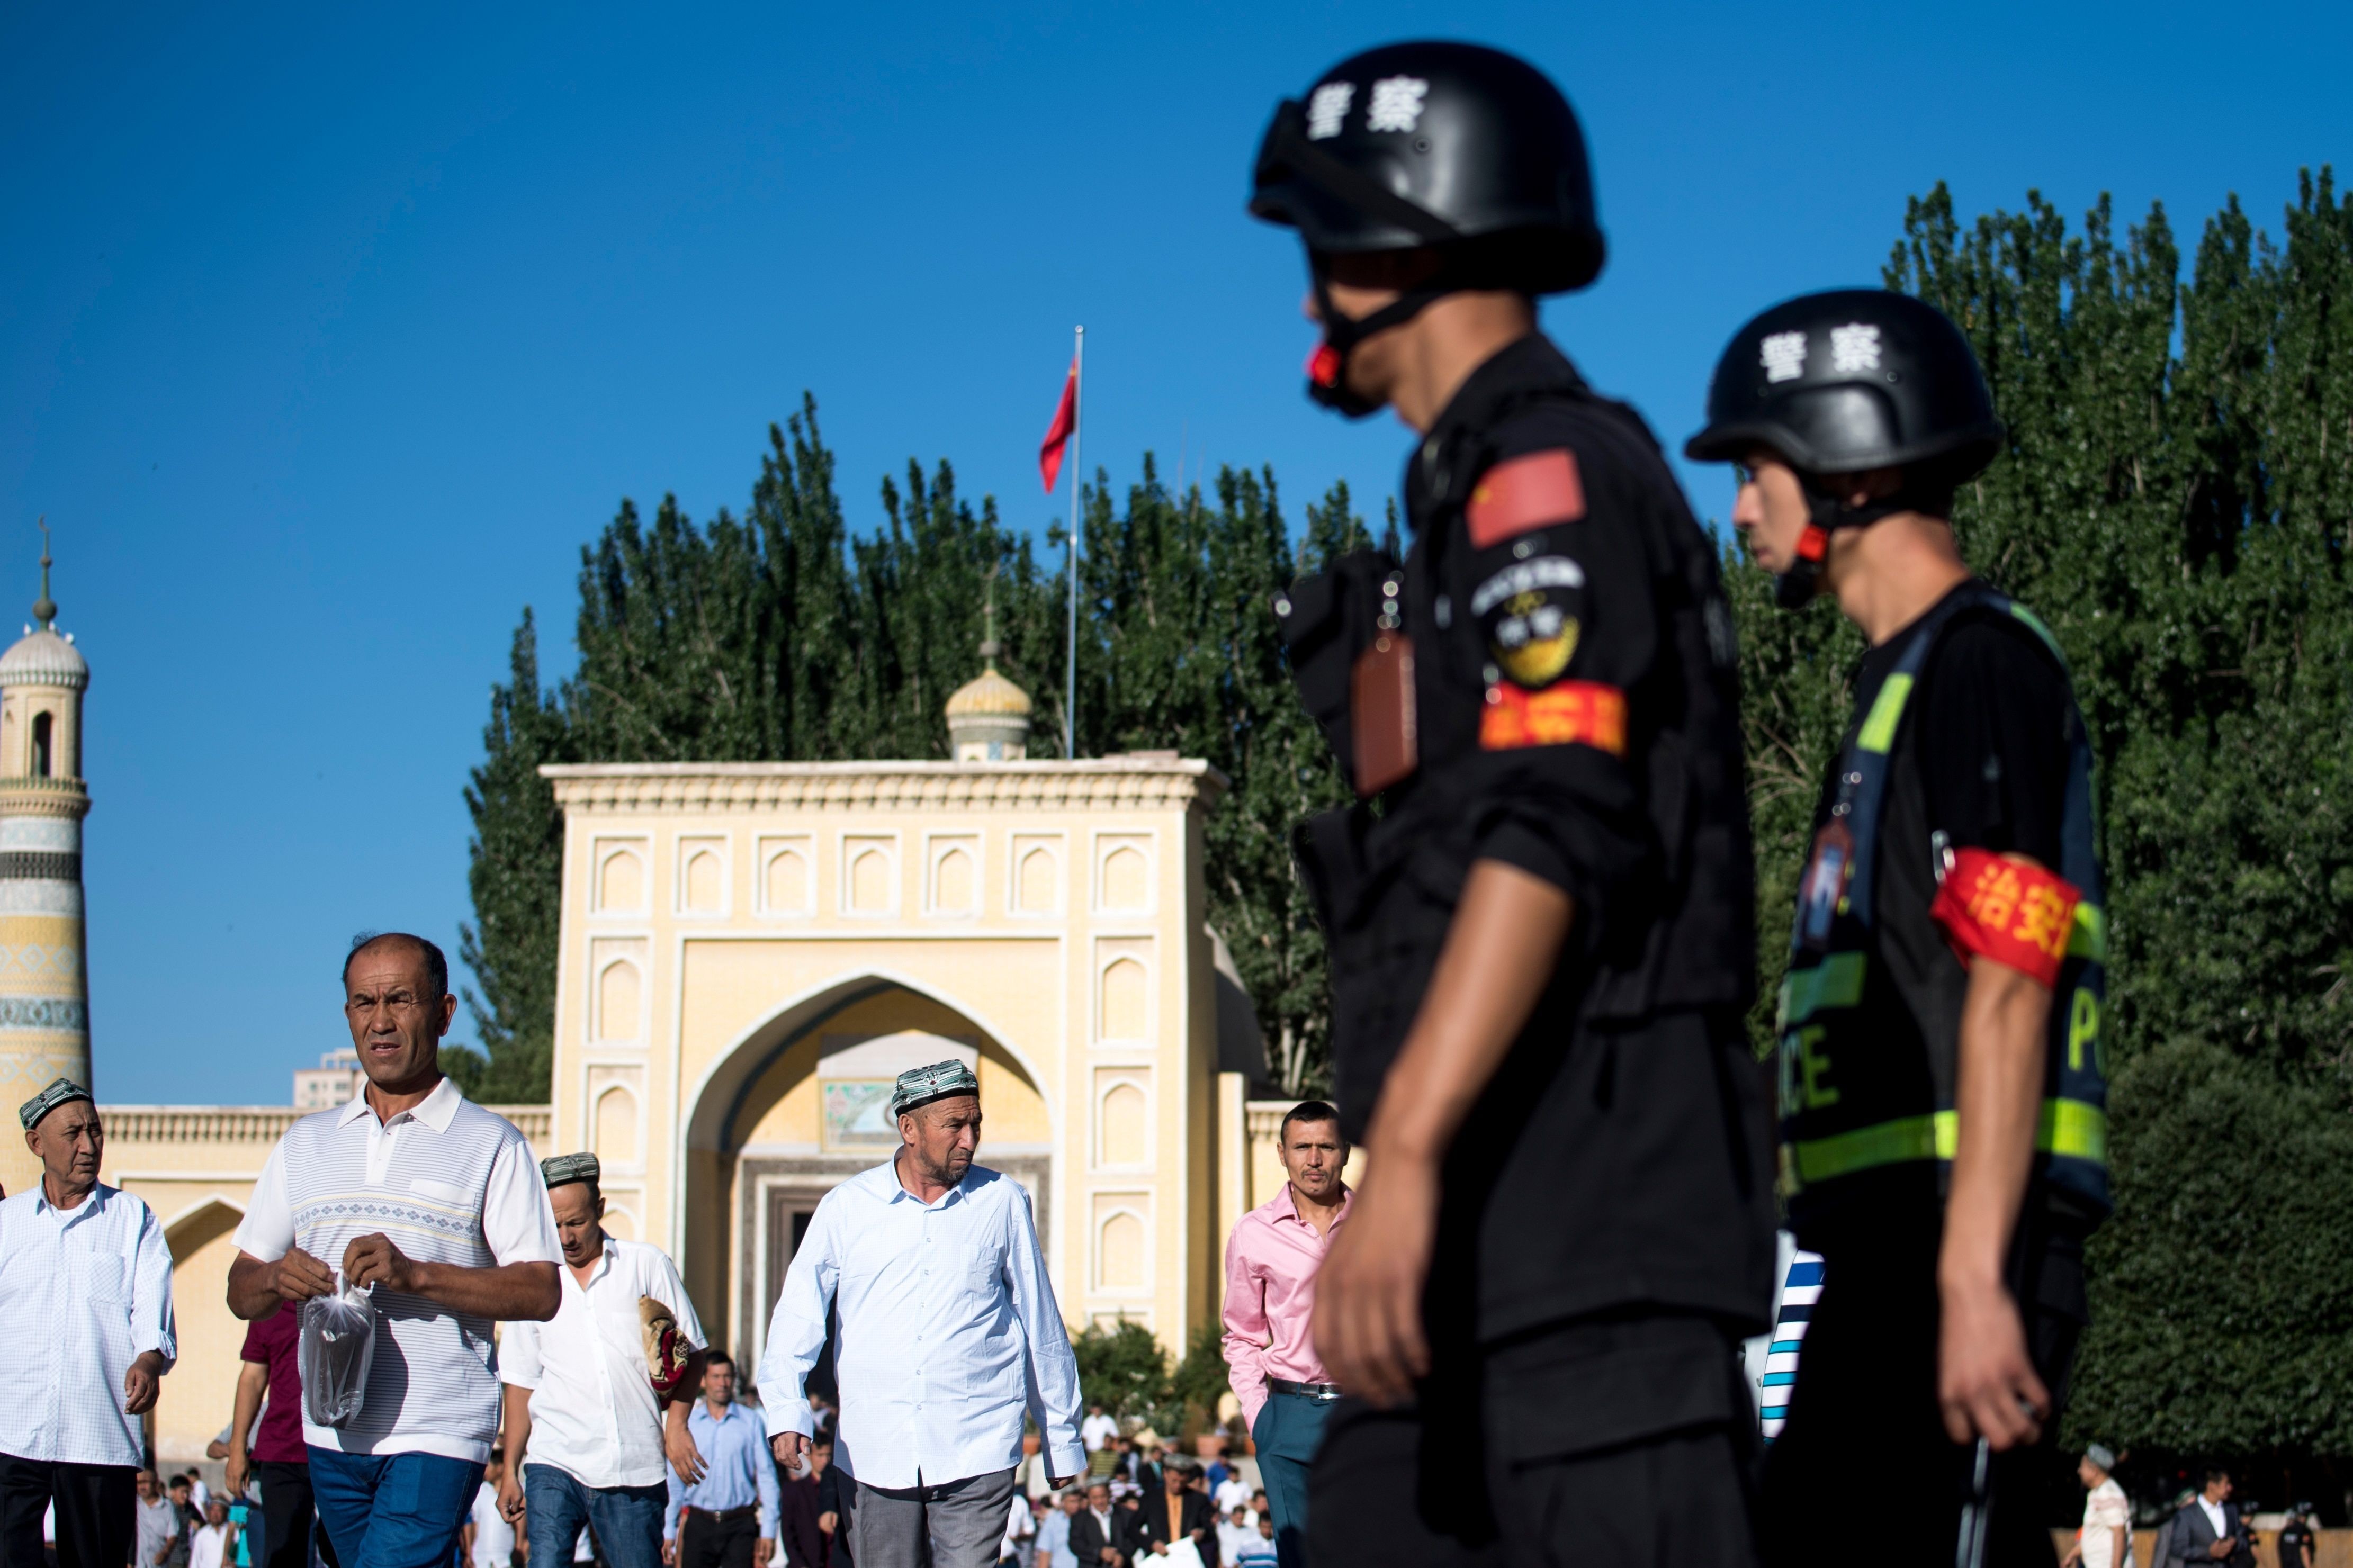 The appointment of Wang Yang as the new policy handler for China’s Xinjiang region is unlikely to lead to a softening in policy, despite his liberal reputation. Photo: AFP